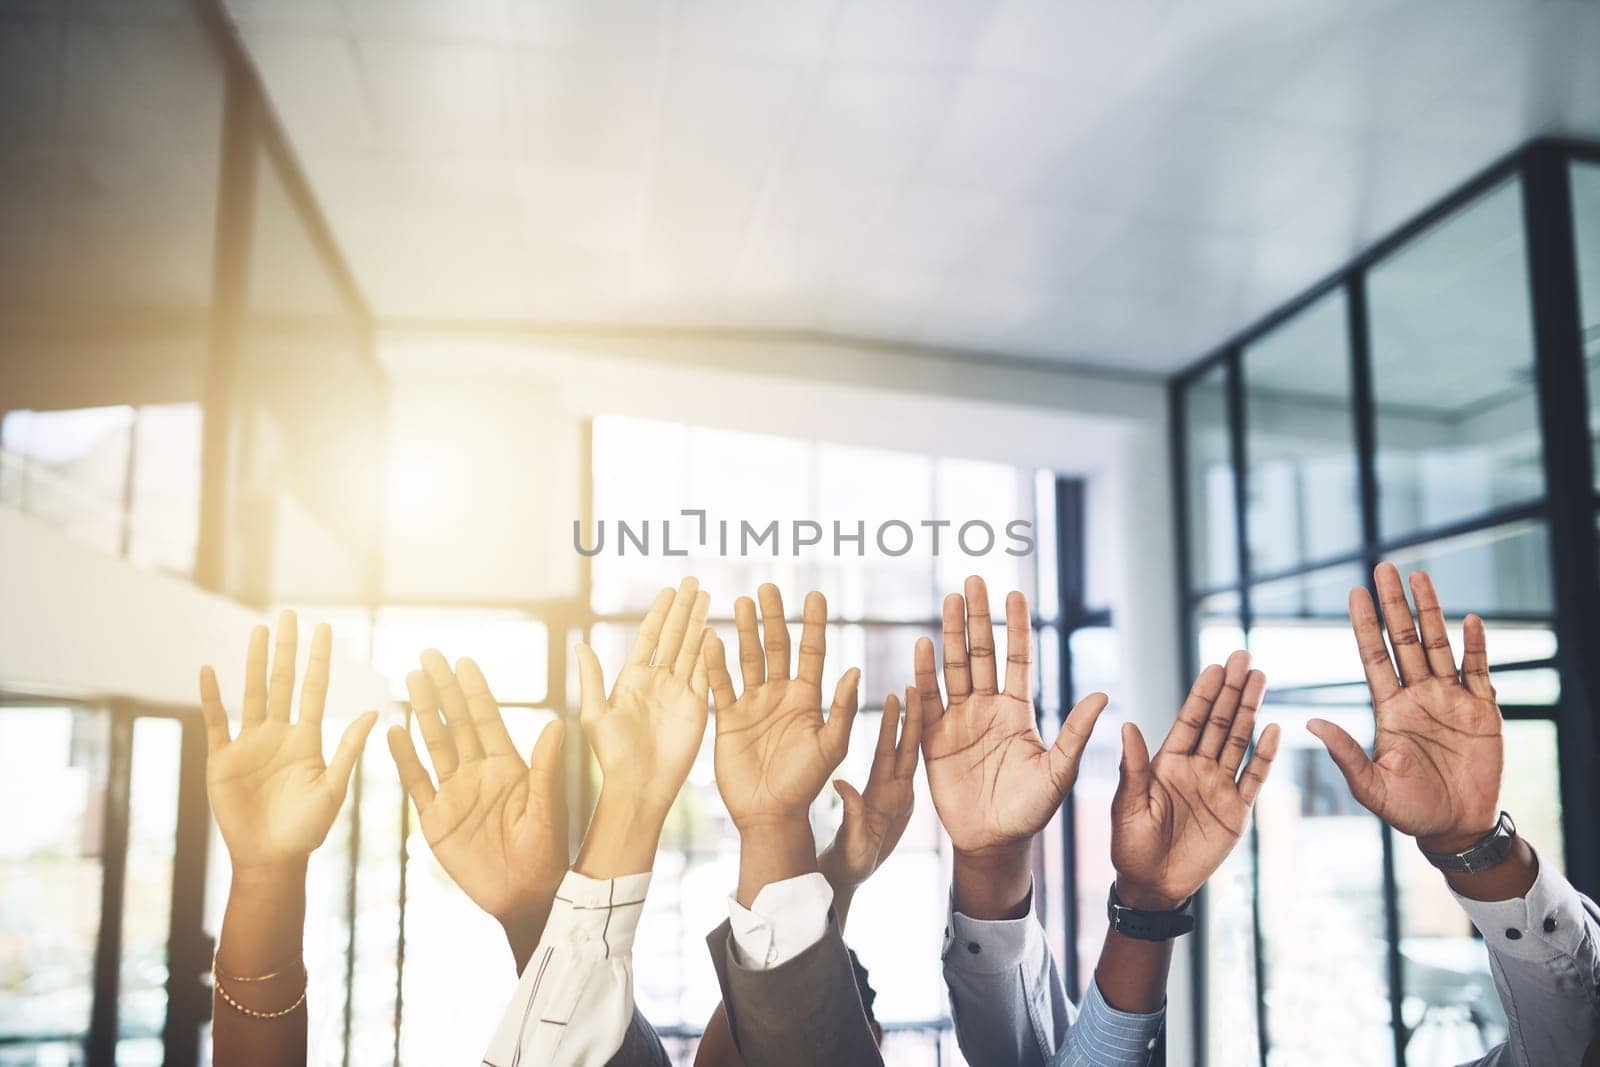 We would like to volunteer our services. Closeup shot of a group of businesspeople raising their hands in an office